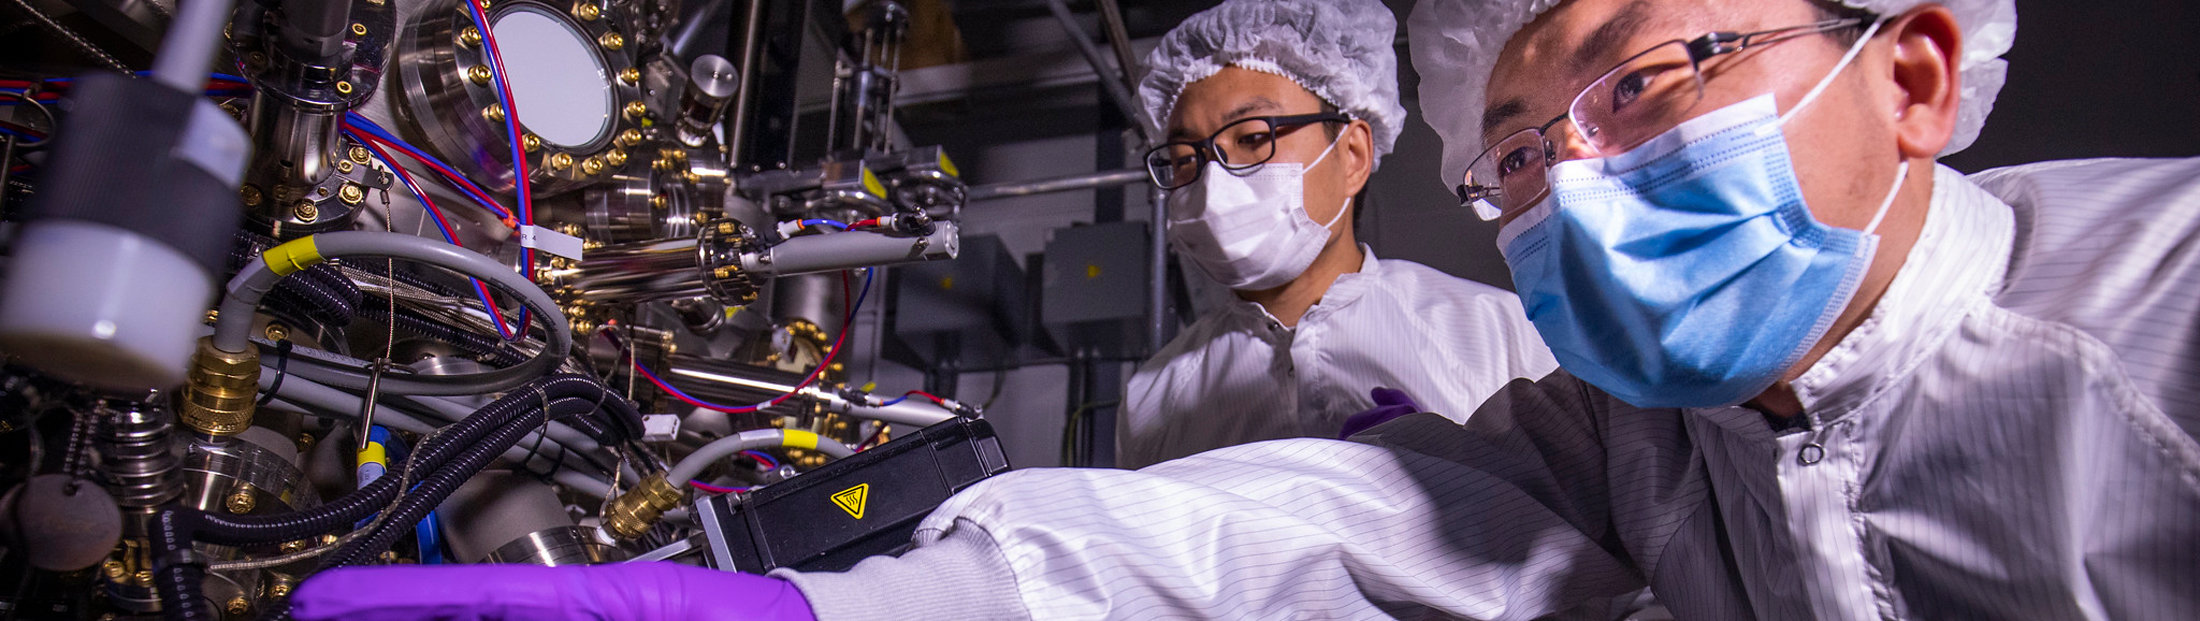 Research scientists Ding Wang (left) and Ping Wang (right) discuss the growth behavior of the ferroelectric semiconductor deposited using the molecular beam epitaxy system that is visible on the left.